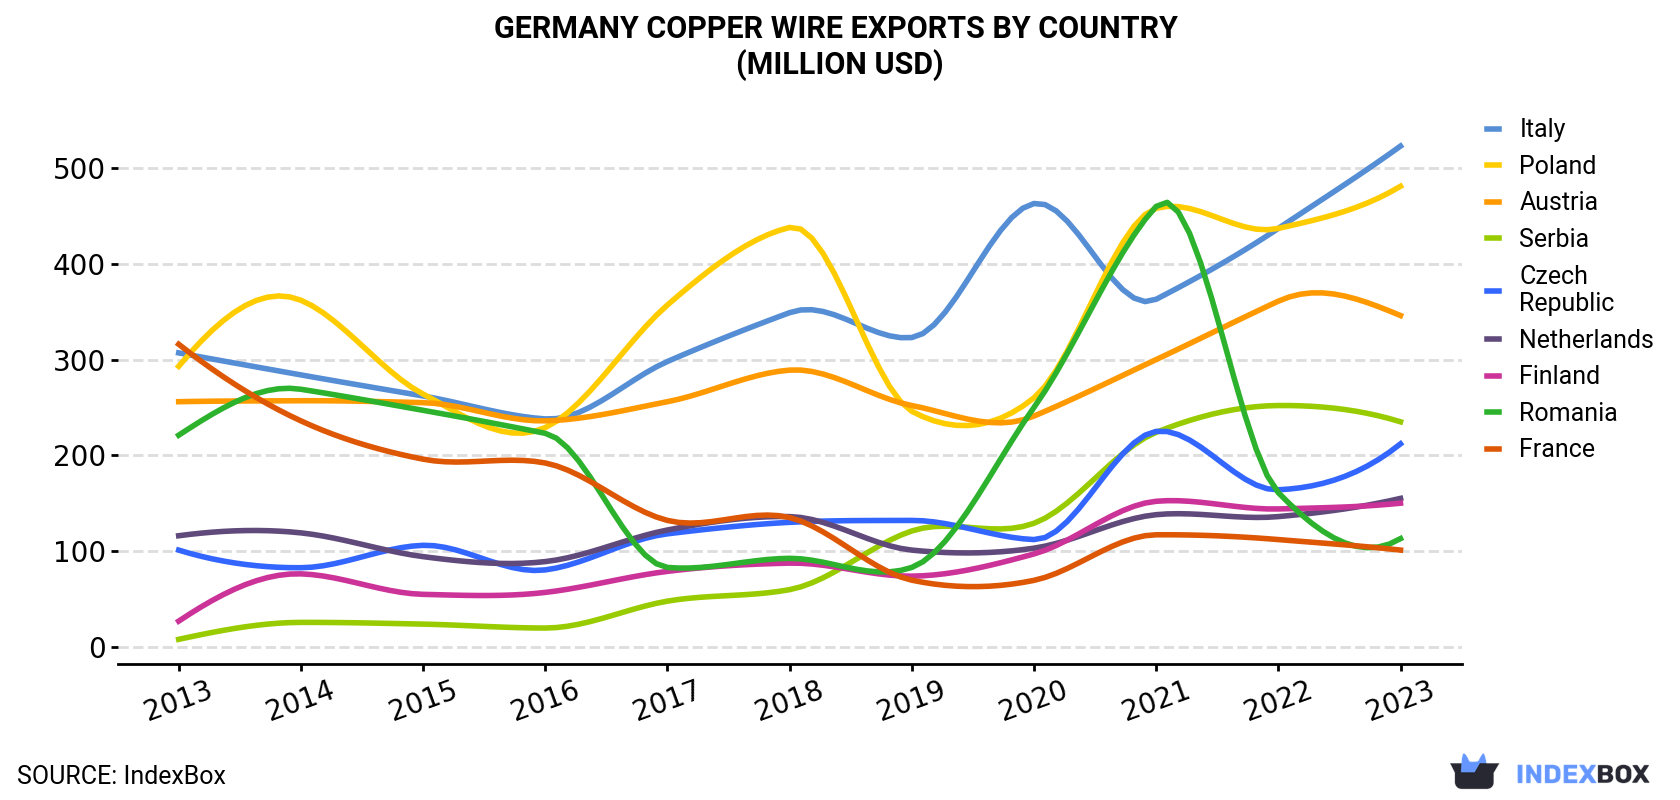 Germany Copper Wire Exports By Country (Million USD)